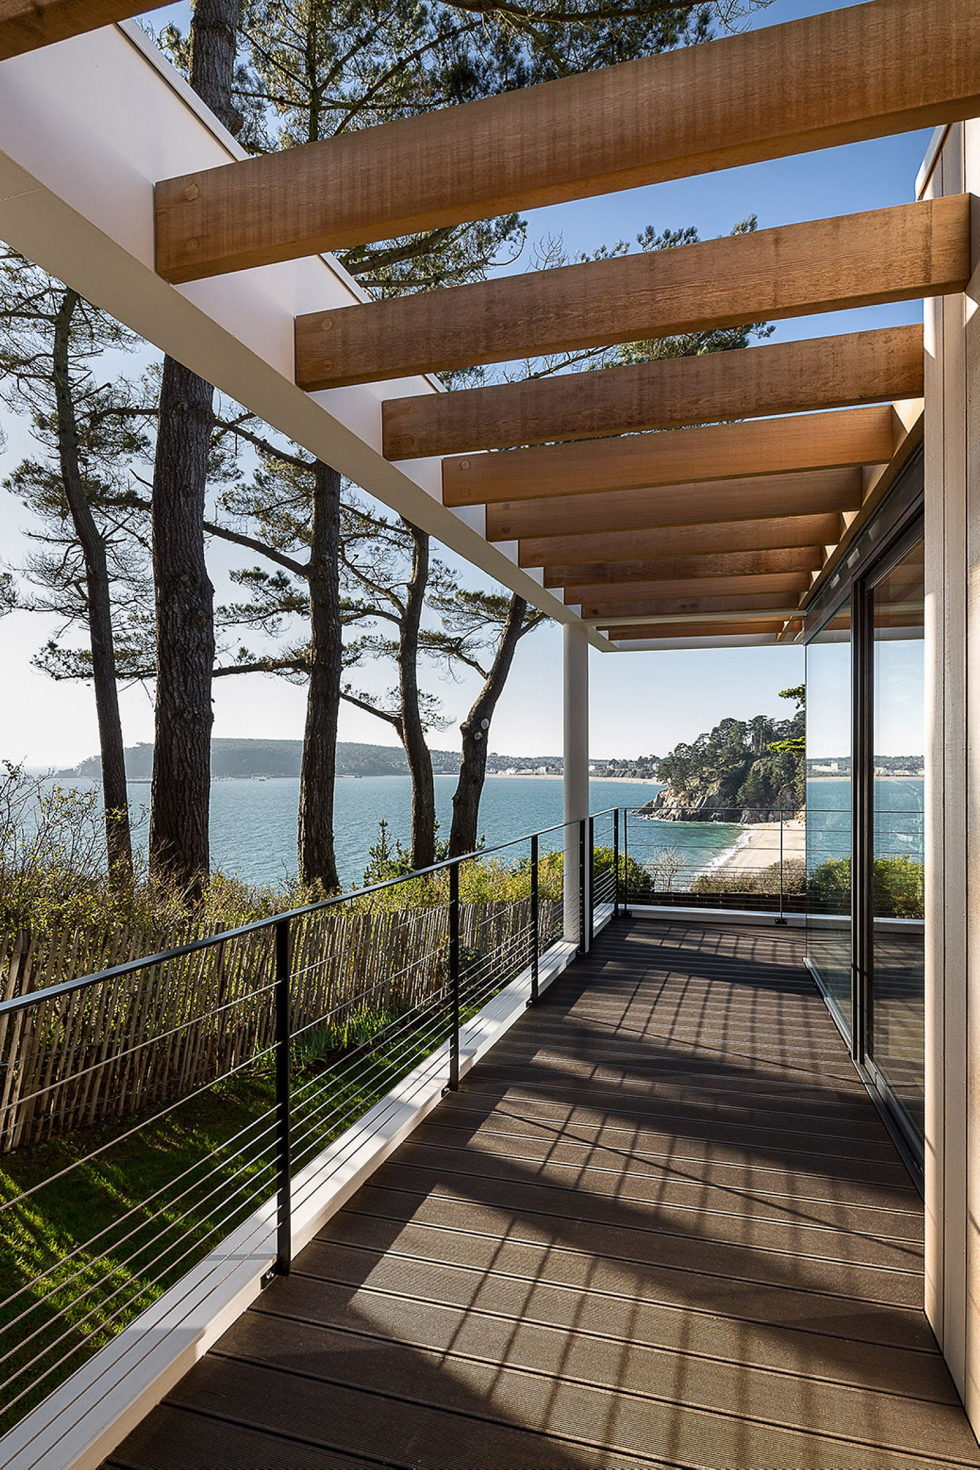 Outstanding Bay View From Residency At Crozon Peninsula, France 17